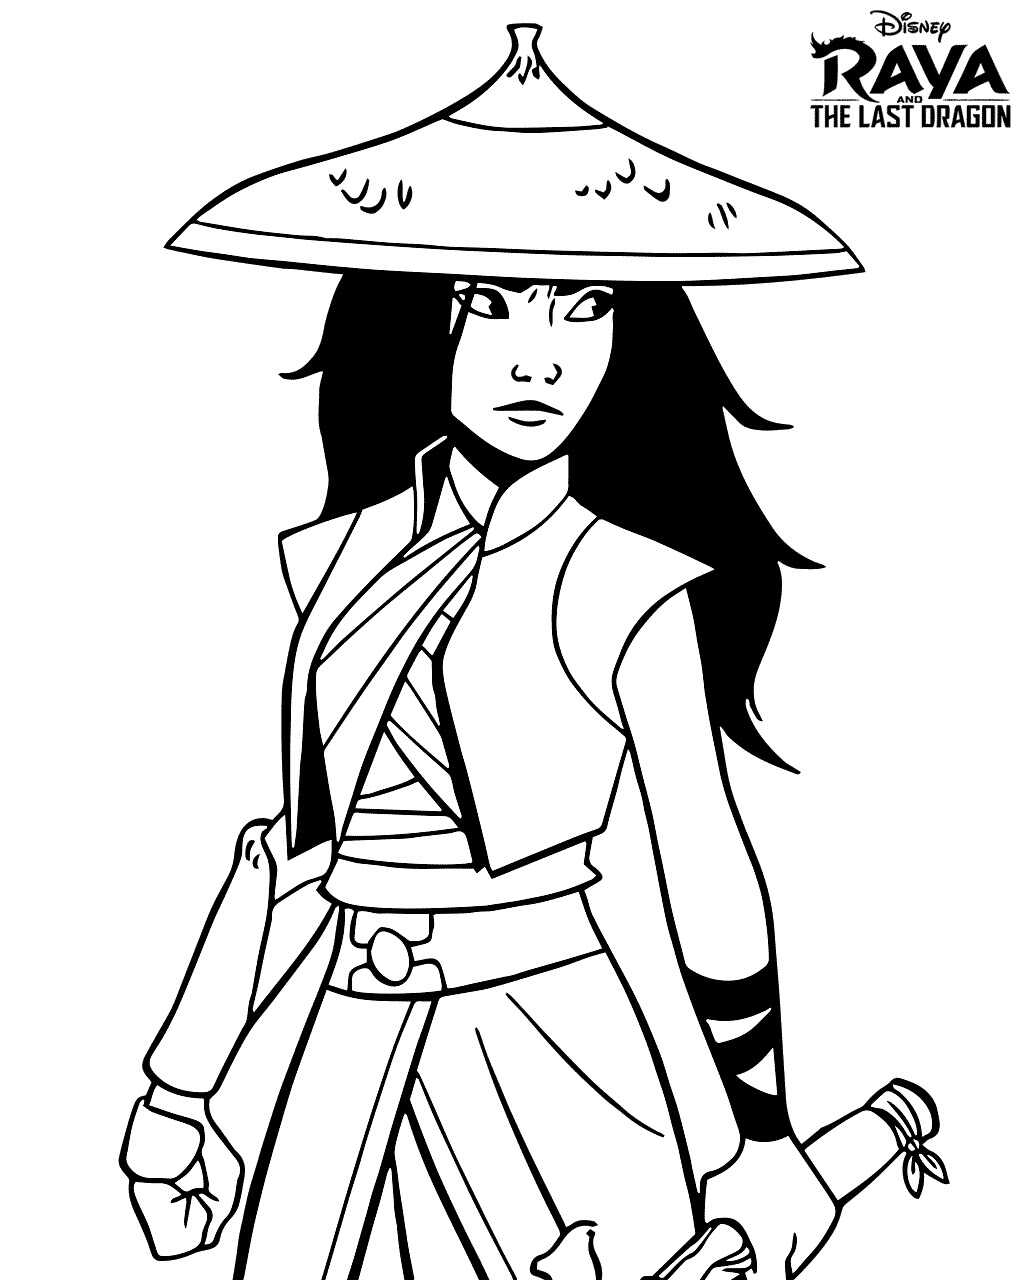 Princess Raya wears hat and holds her sword Coloring Page